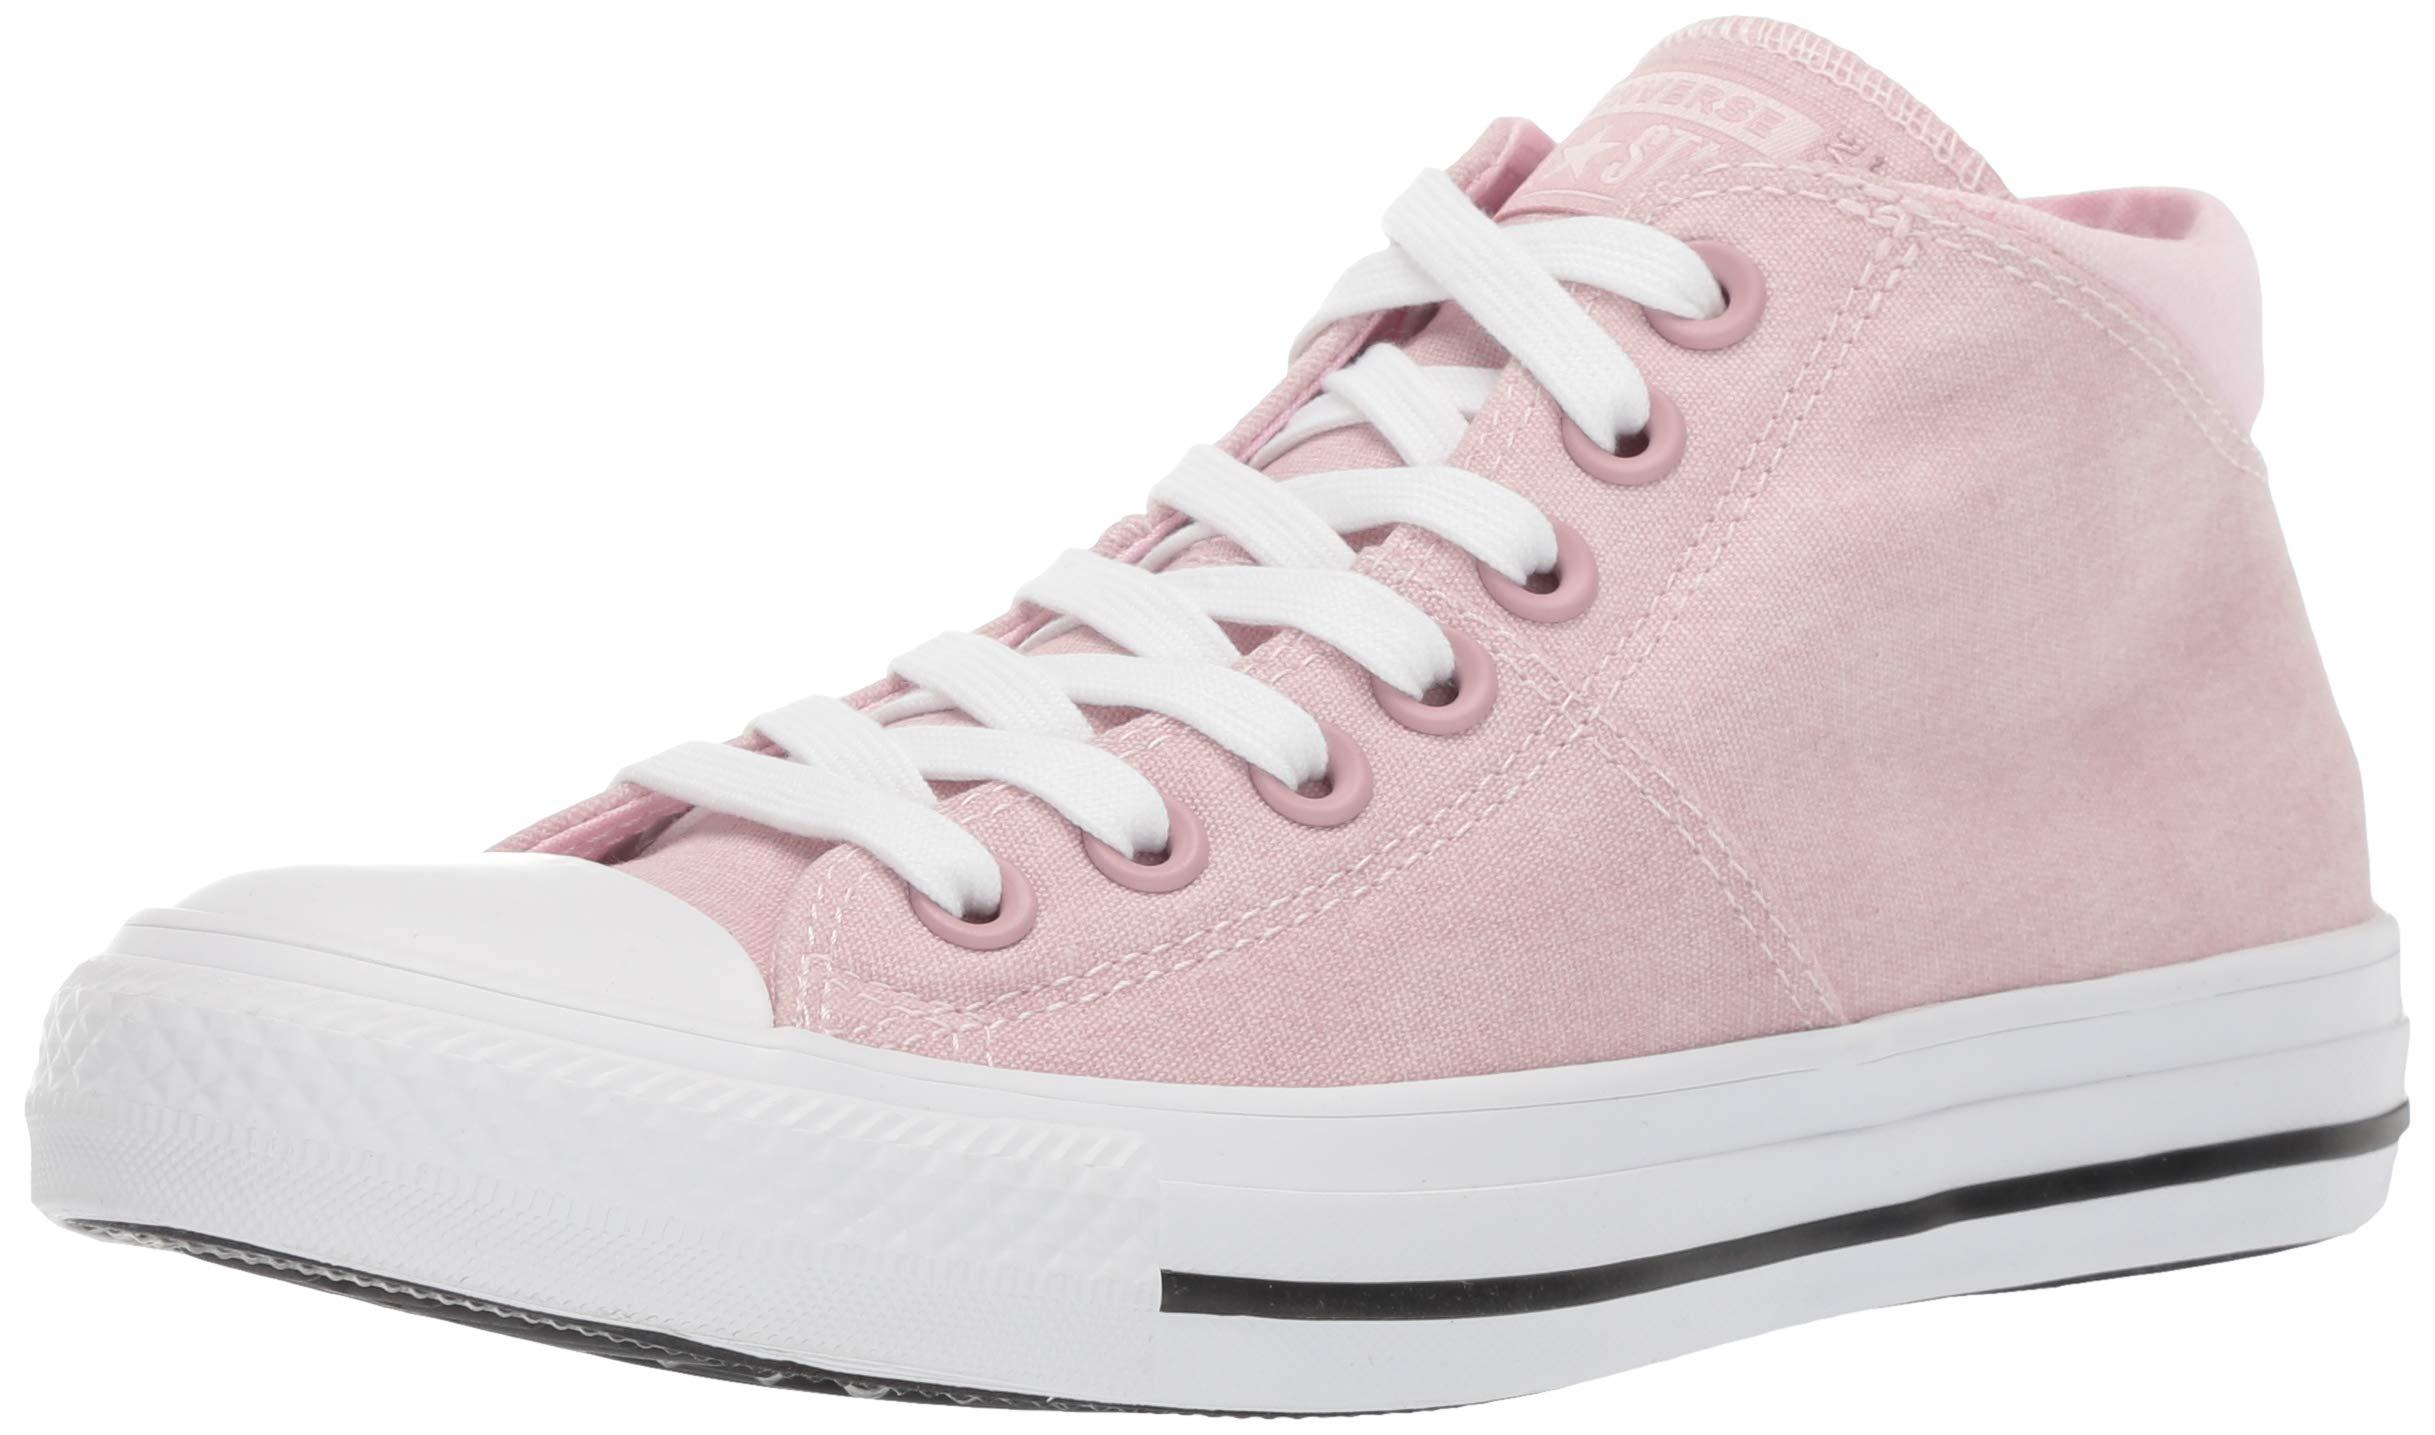 Converse Chuck Taylor All Star Madison Mid Top Sneaker in Pink | Lyst